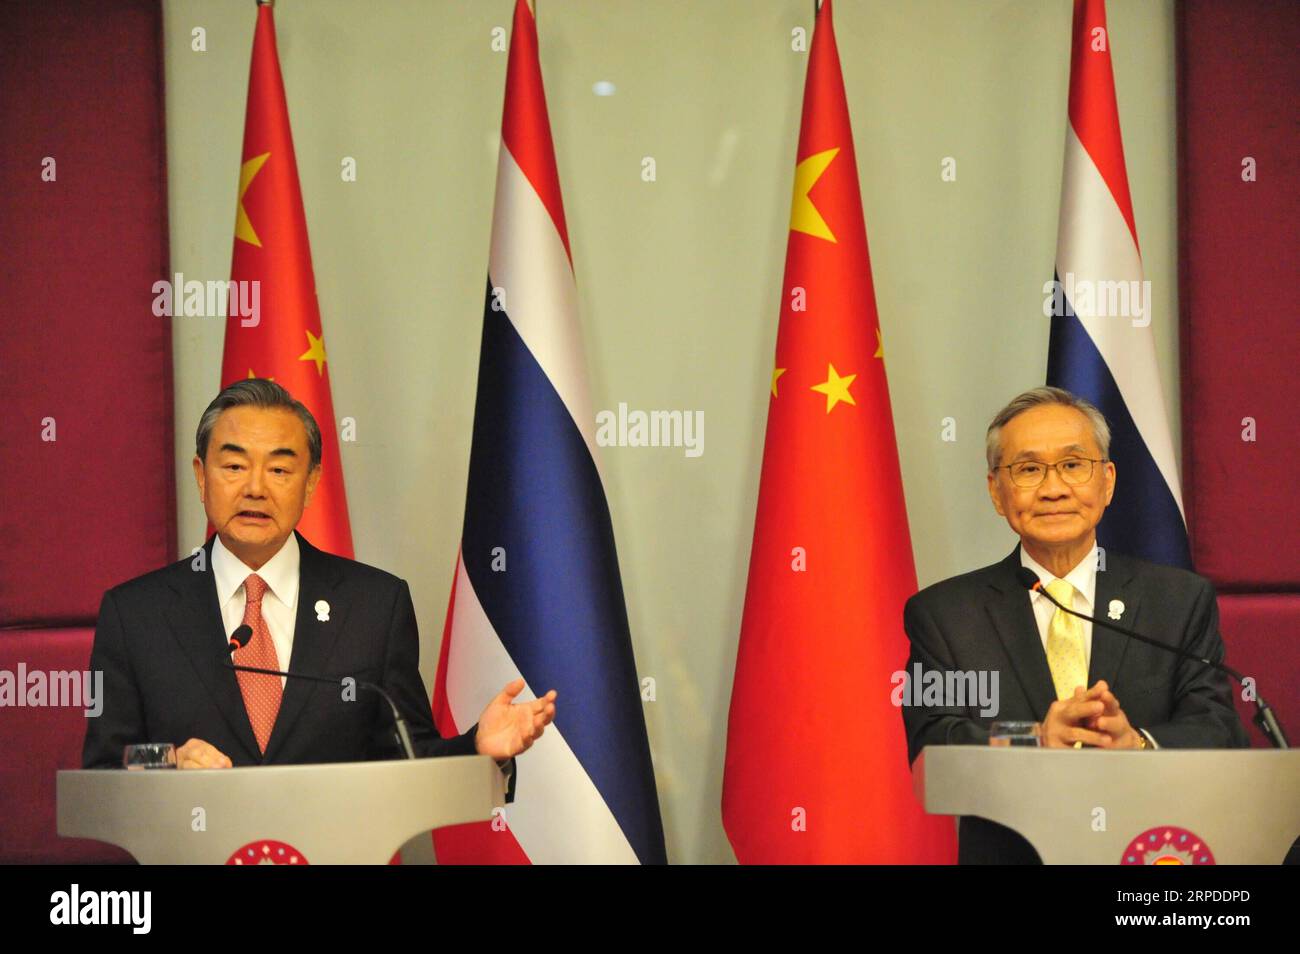 (190731) -- BANGKOK, July 31, 2019 (Xinhua) -- Chinese State Councilor and Foreign Minister Wang Yi (L) and Thai Foreign Minister Don Pramudwinai meet the press after their meeting in Bangkok, Thailand, on July 31, 2019. (Xinhua/Rachen Sageamsak) THAILAND-BANGKOK-CHINA-FM-MEETING PUBLICATIONxNOTxINxCHN Stock Photo